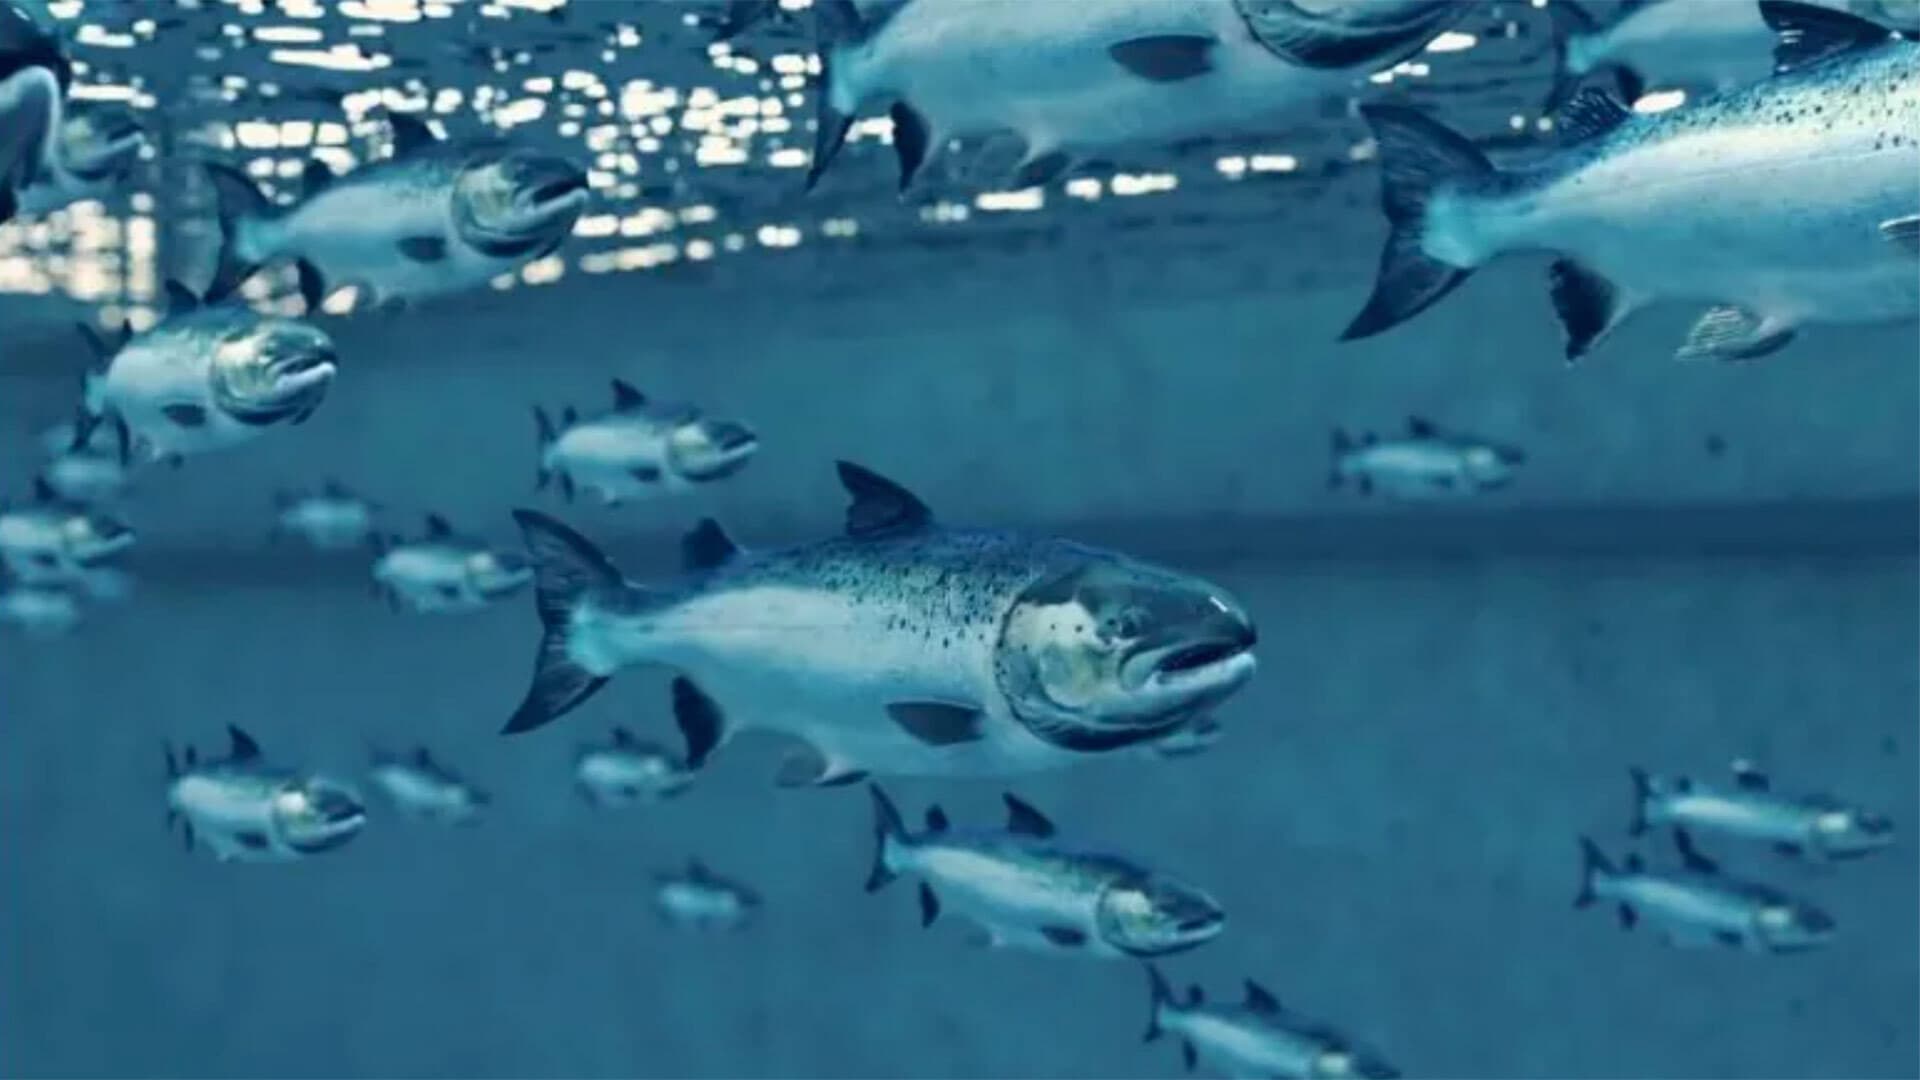 Group of salmon swimming